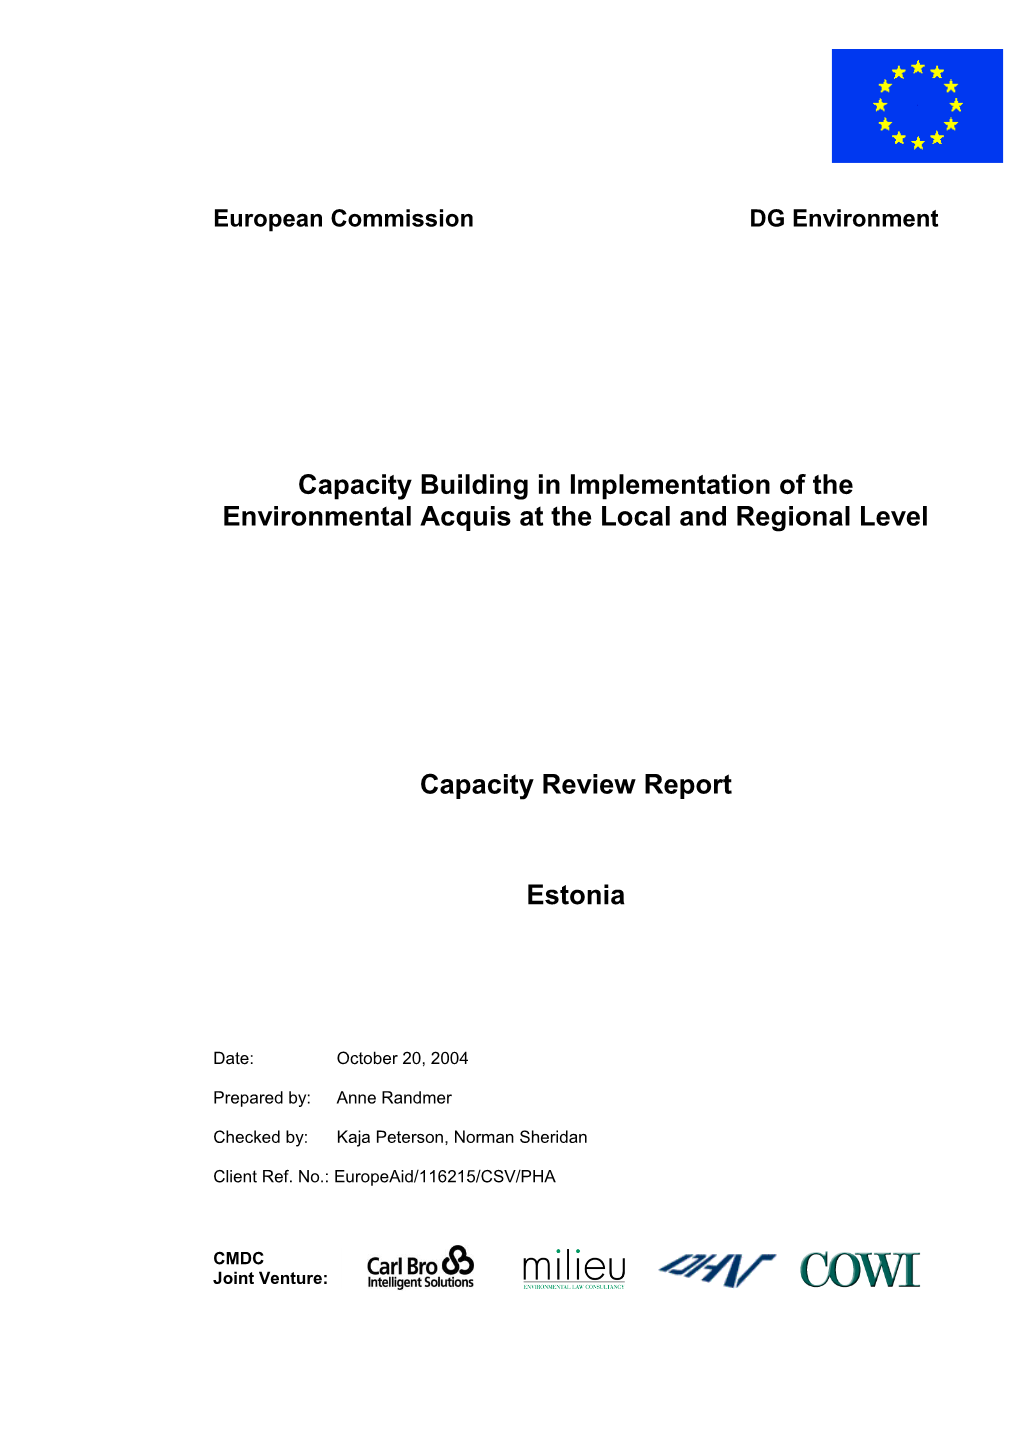 Capacity Building in Implementation of the Environmental Acquis at the Local and Regional